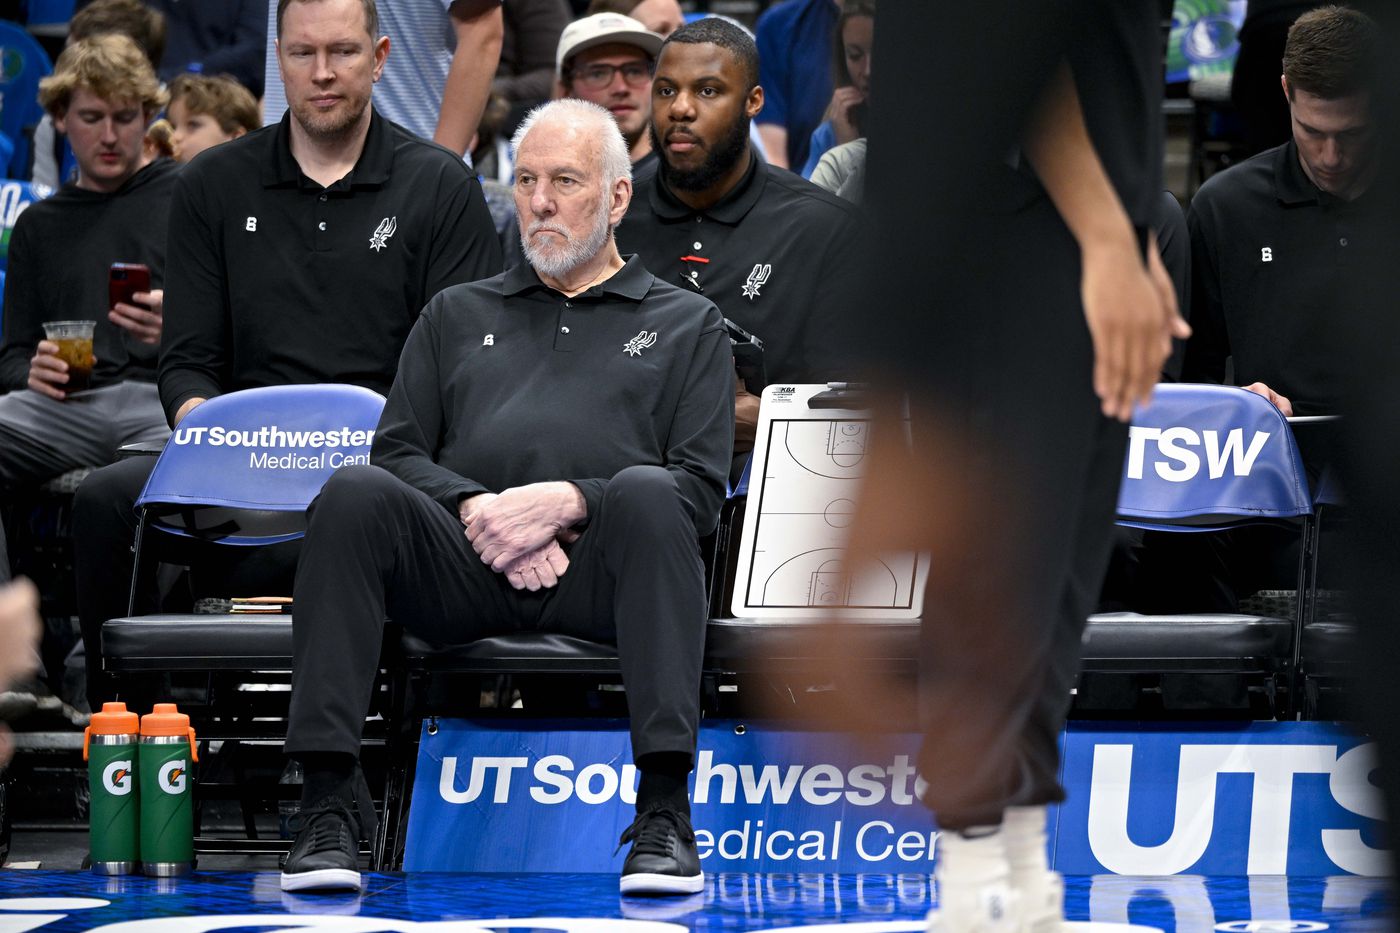 The case for the Spurs to be treated again next season